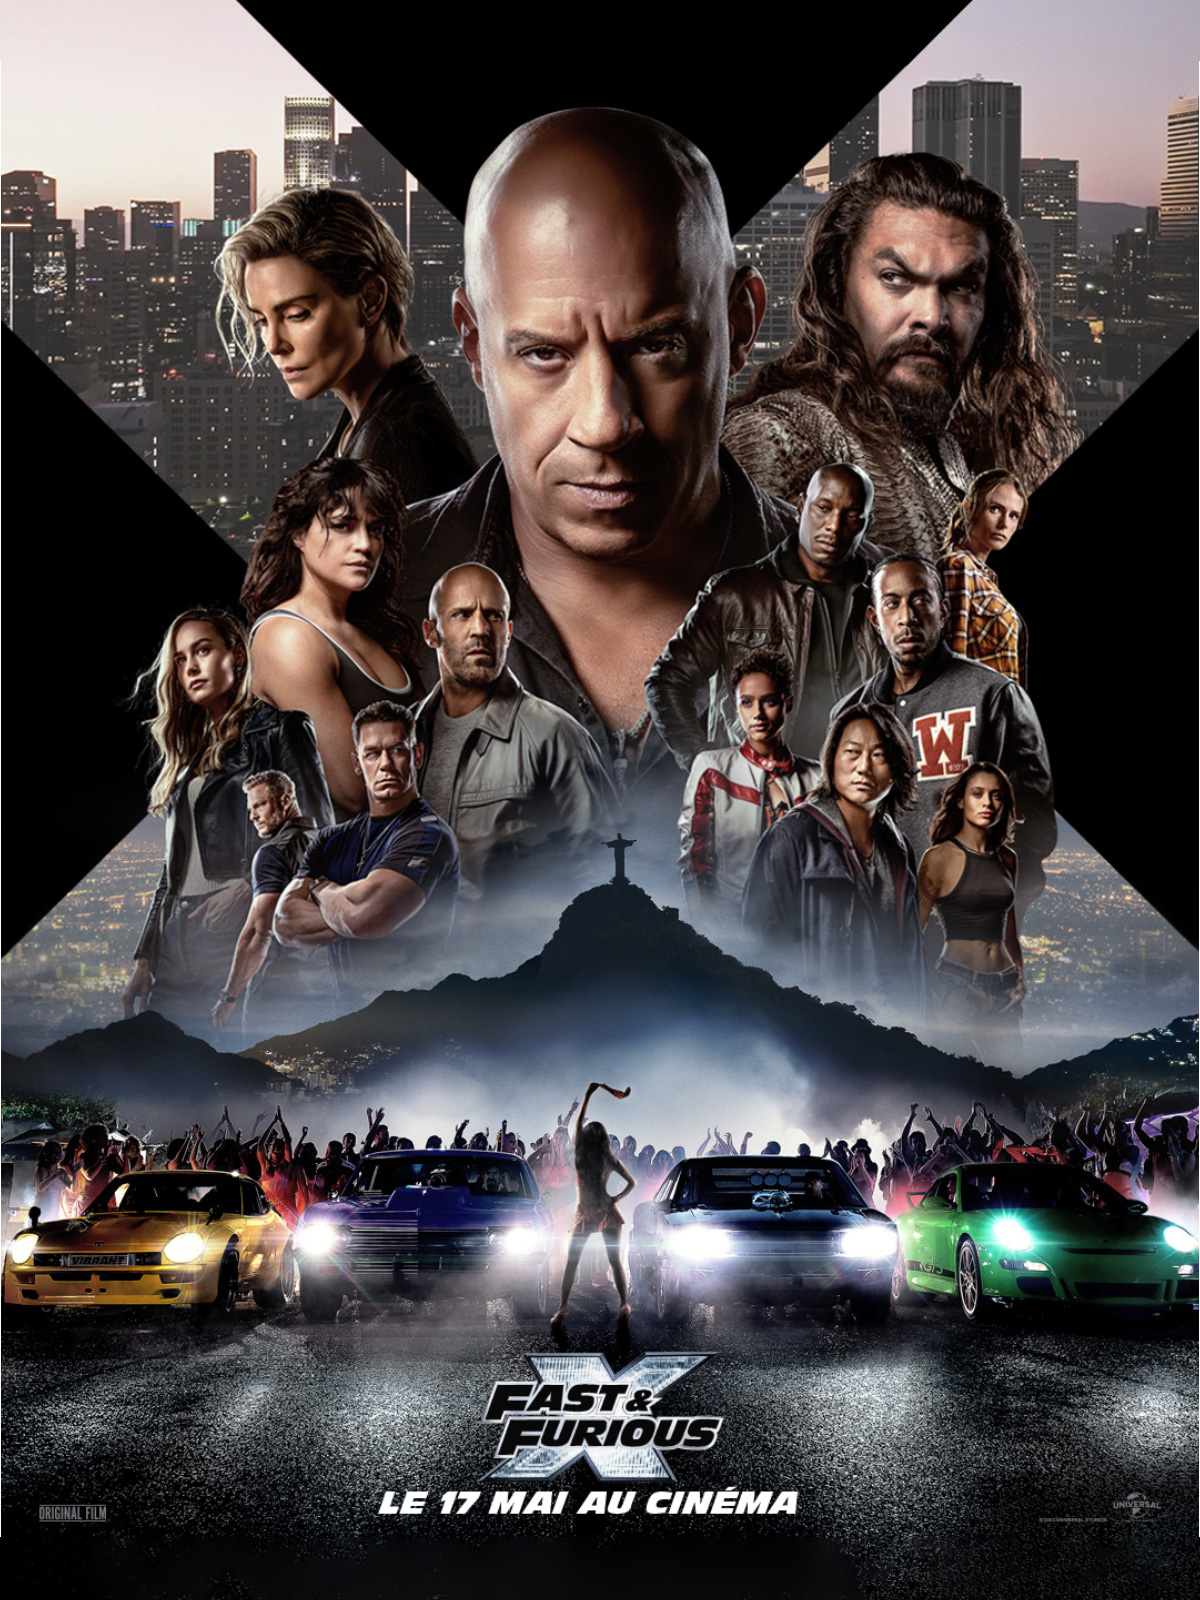 Voir Film Fast & Furious X - film 2023 streaming VF gratuit complet